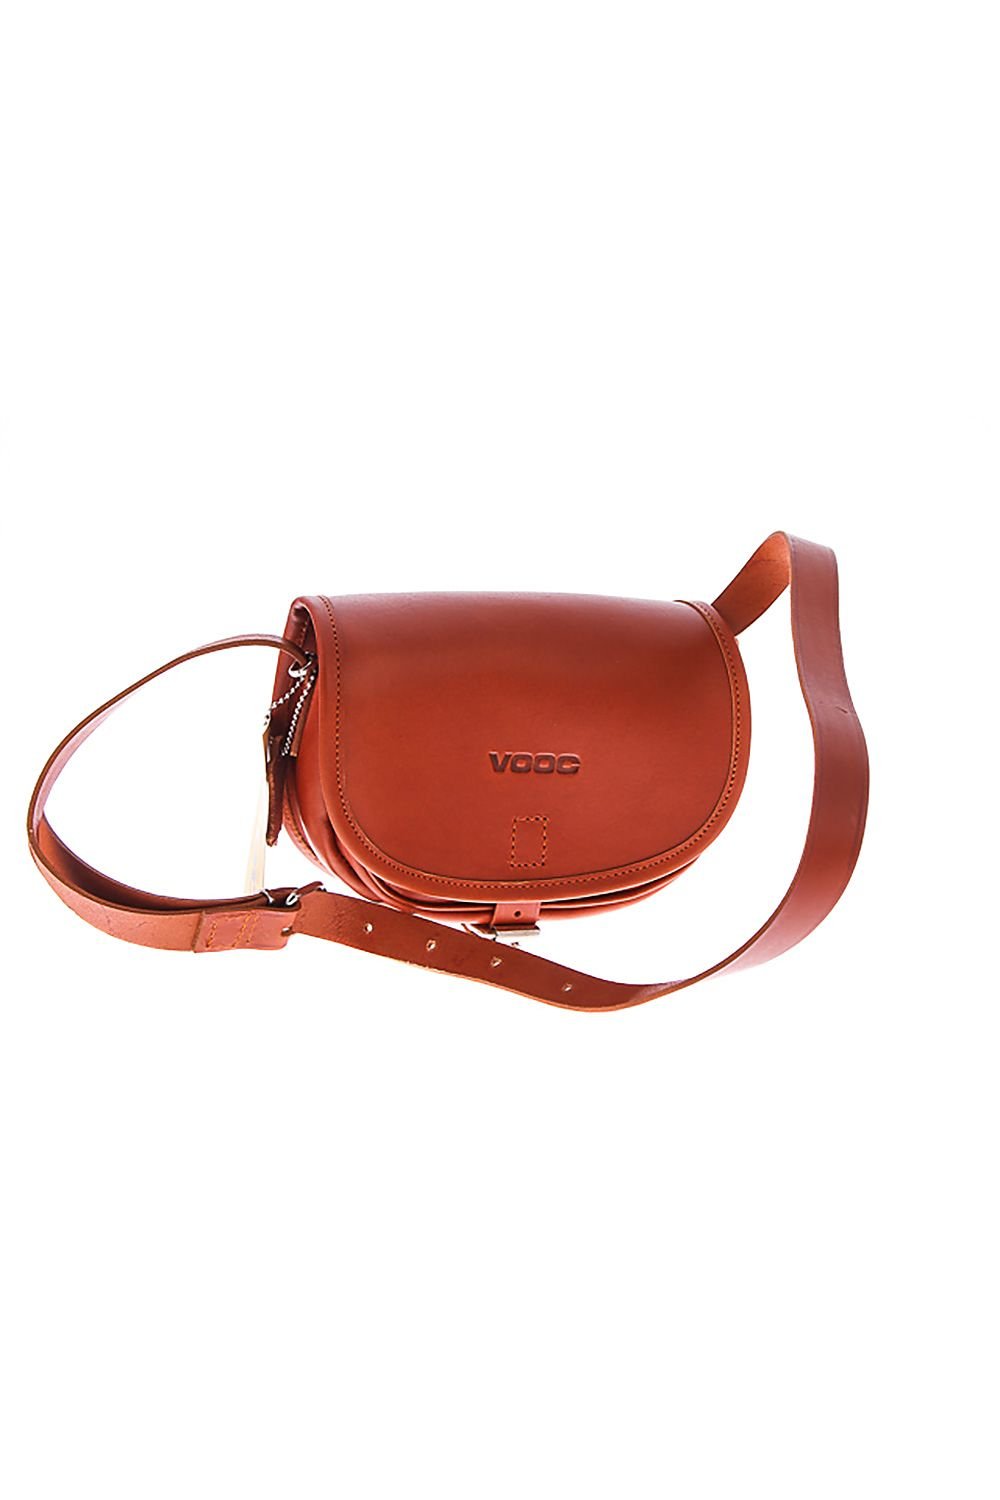 Verosoft Natural Leather Bag - Chic Functional Vintage Style Bag, Perfect for Everyday Use